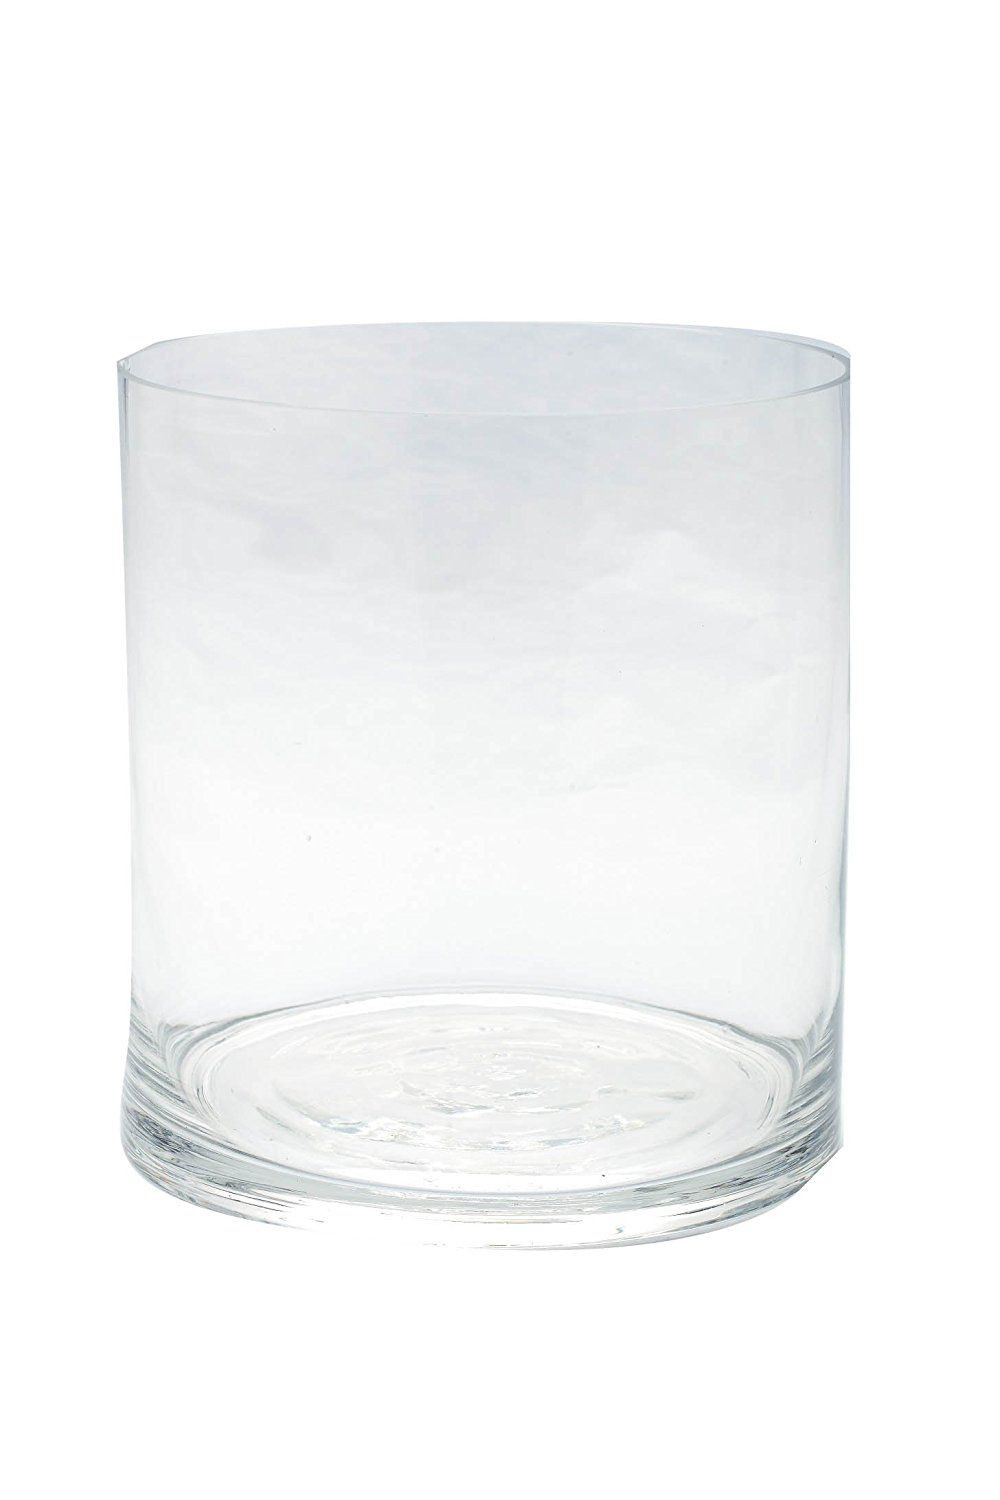 21 Best 9 Inch Cylinder Vase 2024 free download 9 inch cylinder vase of diamond star glass 84010c clear cylinder 9 by 10 want regarding diamond star glass 84010c clear cylinder 9 by 10 want